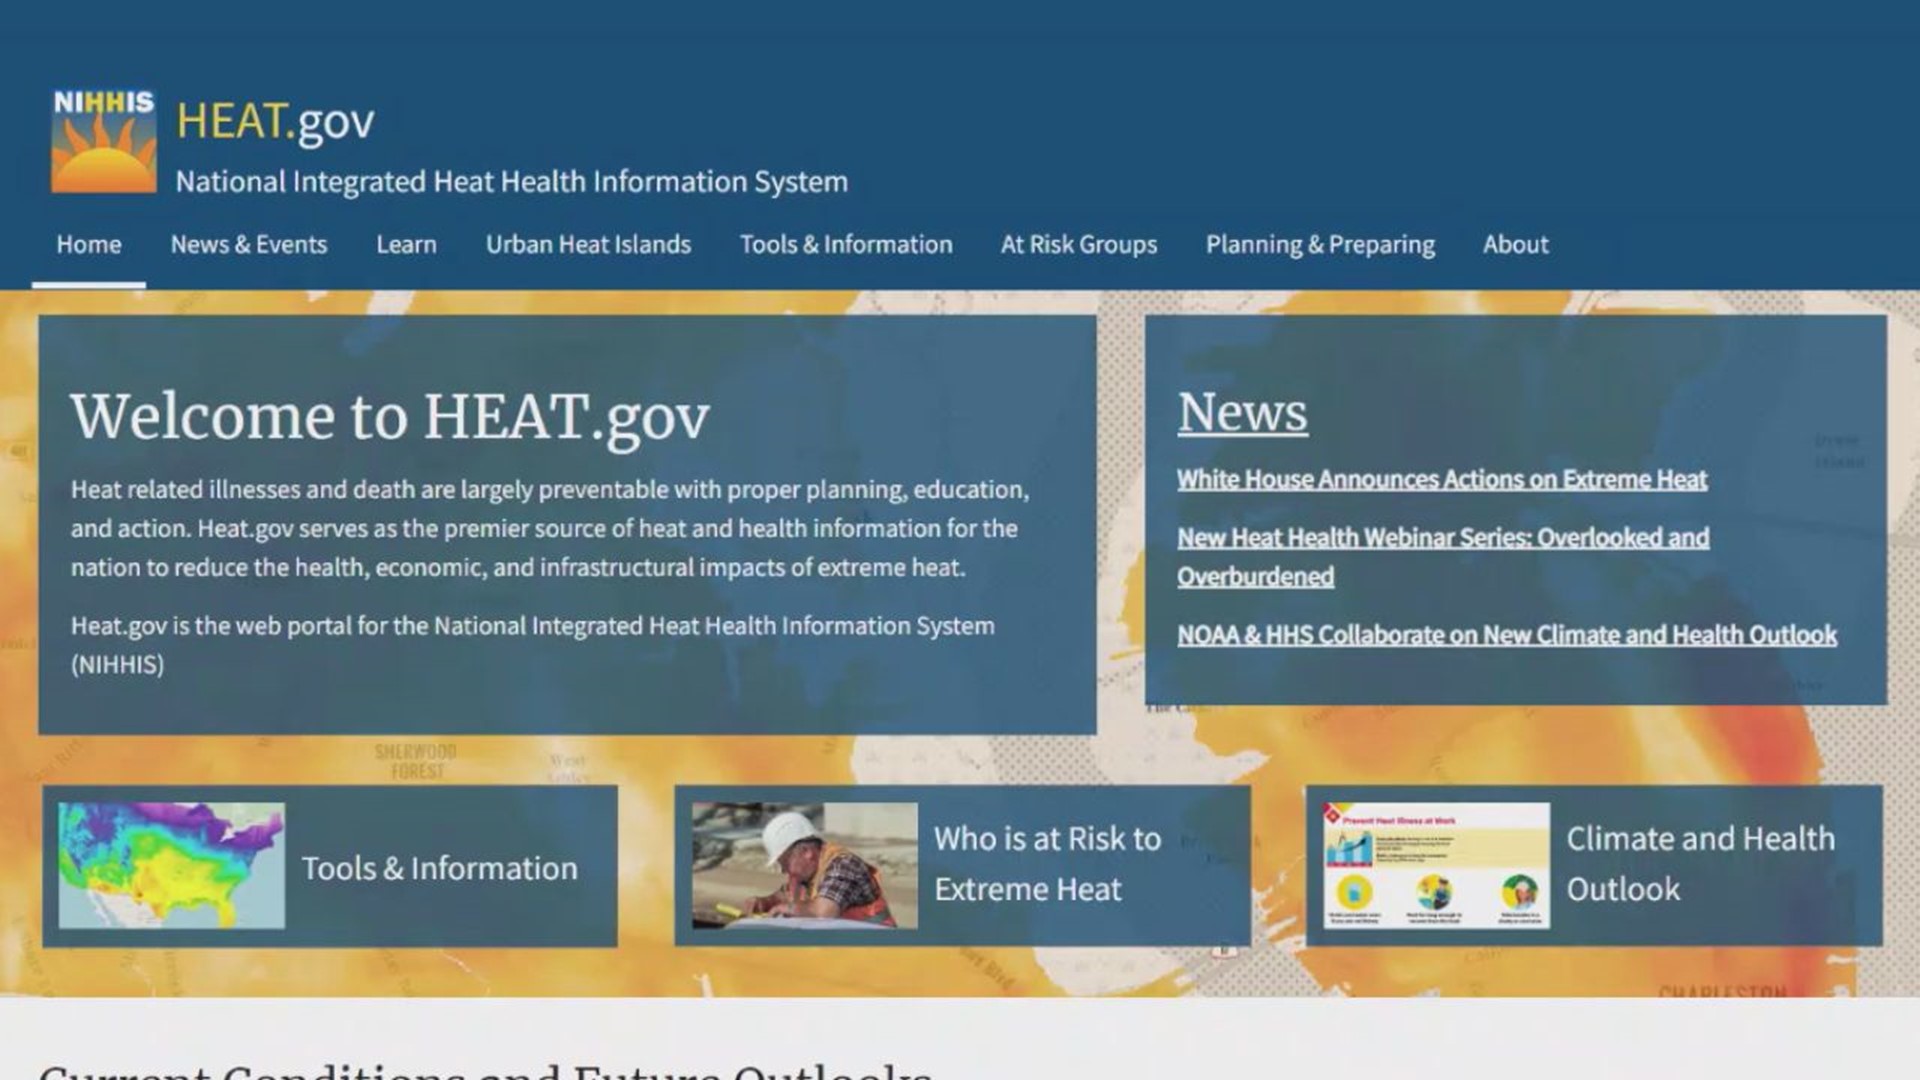 The new website is designed to provide both the public and decision-makers with clear, science-based information to help reduce the health risks of extreme heat.